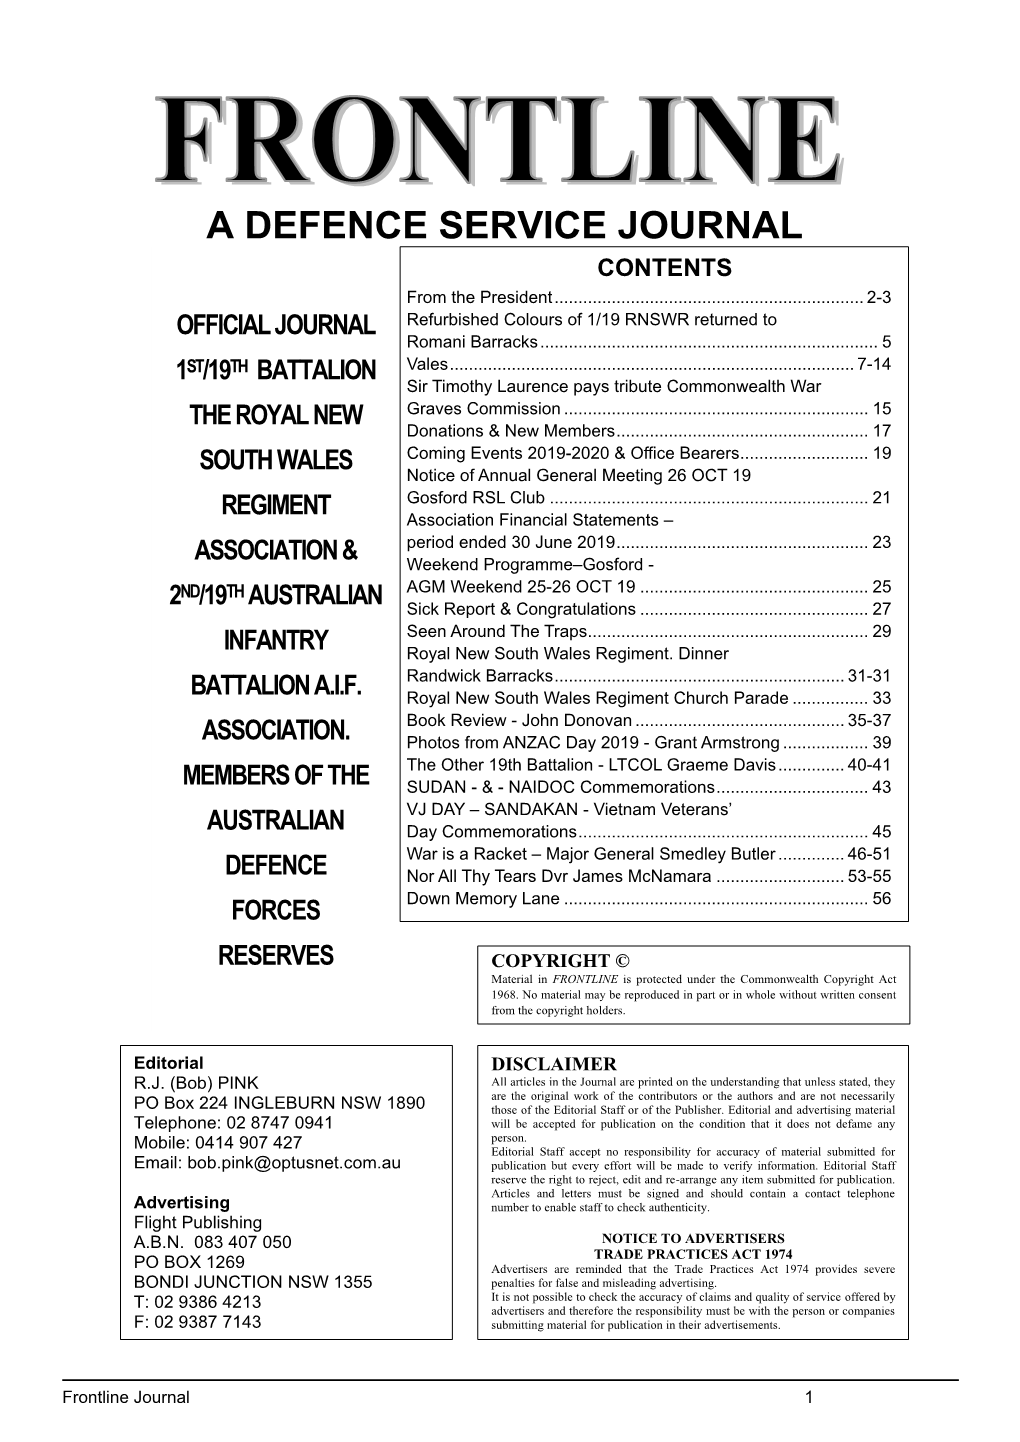 A Defence Service Journal